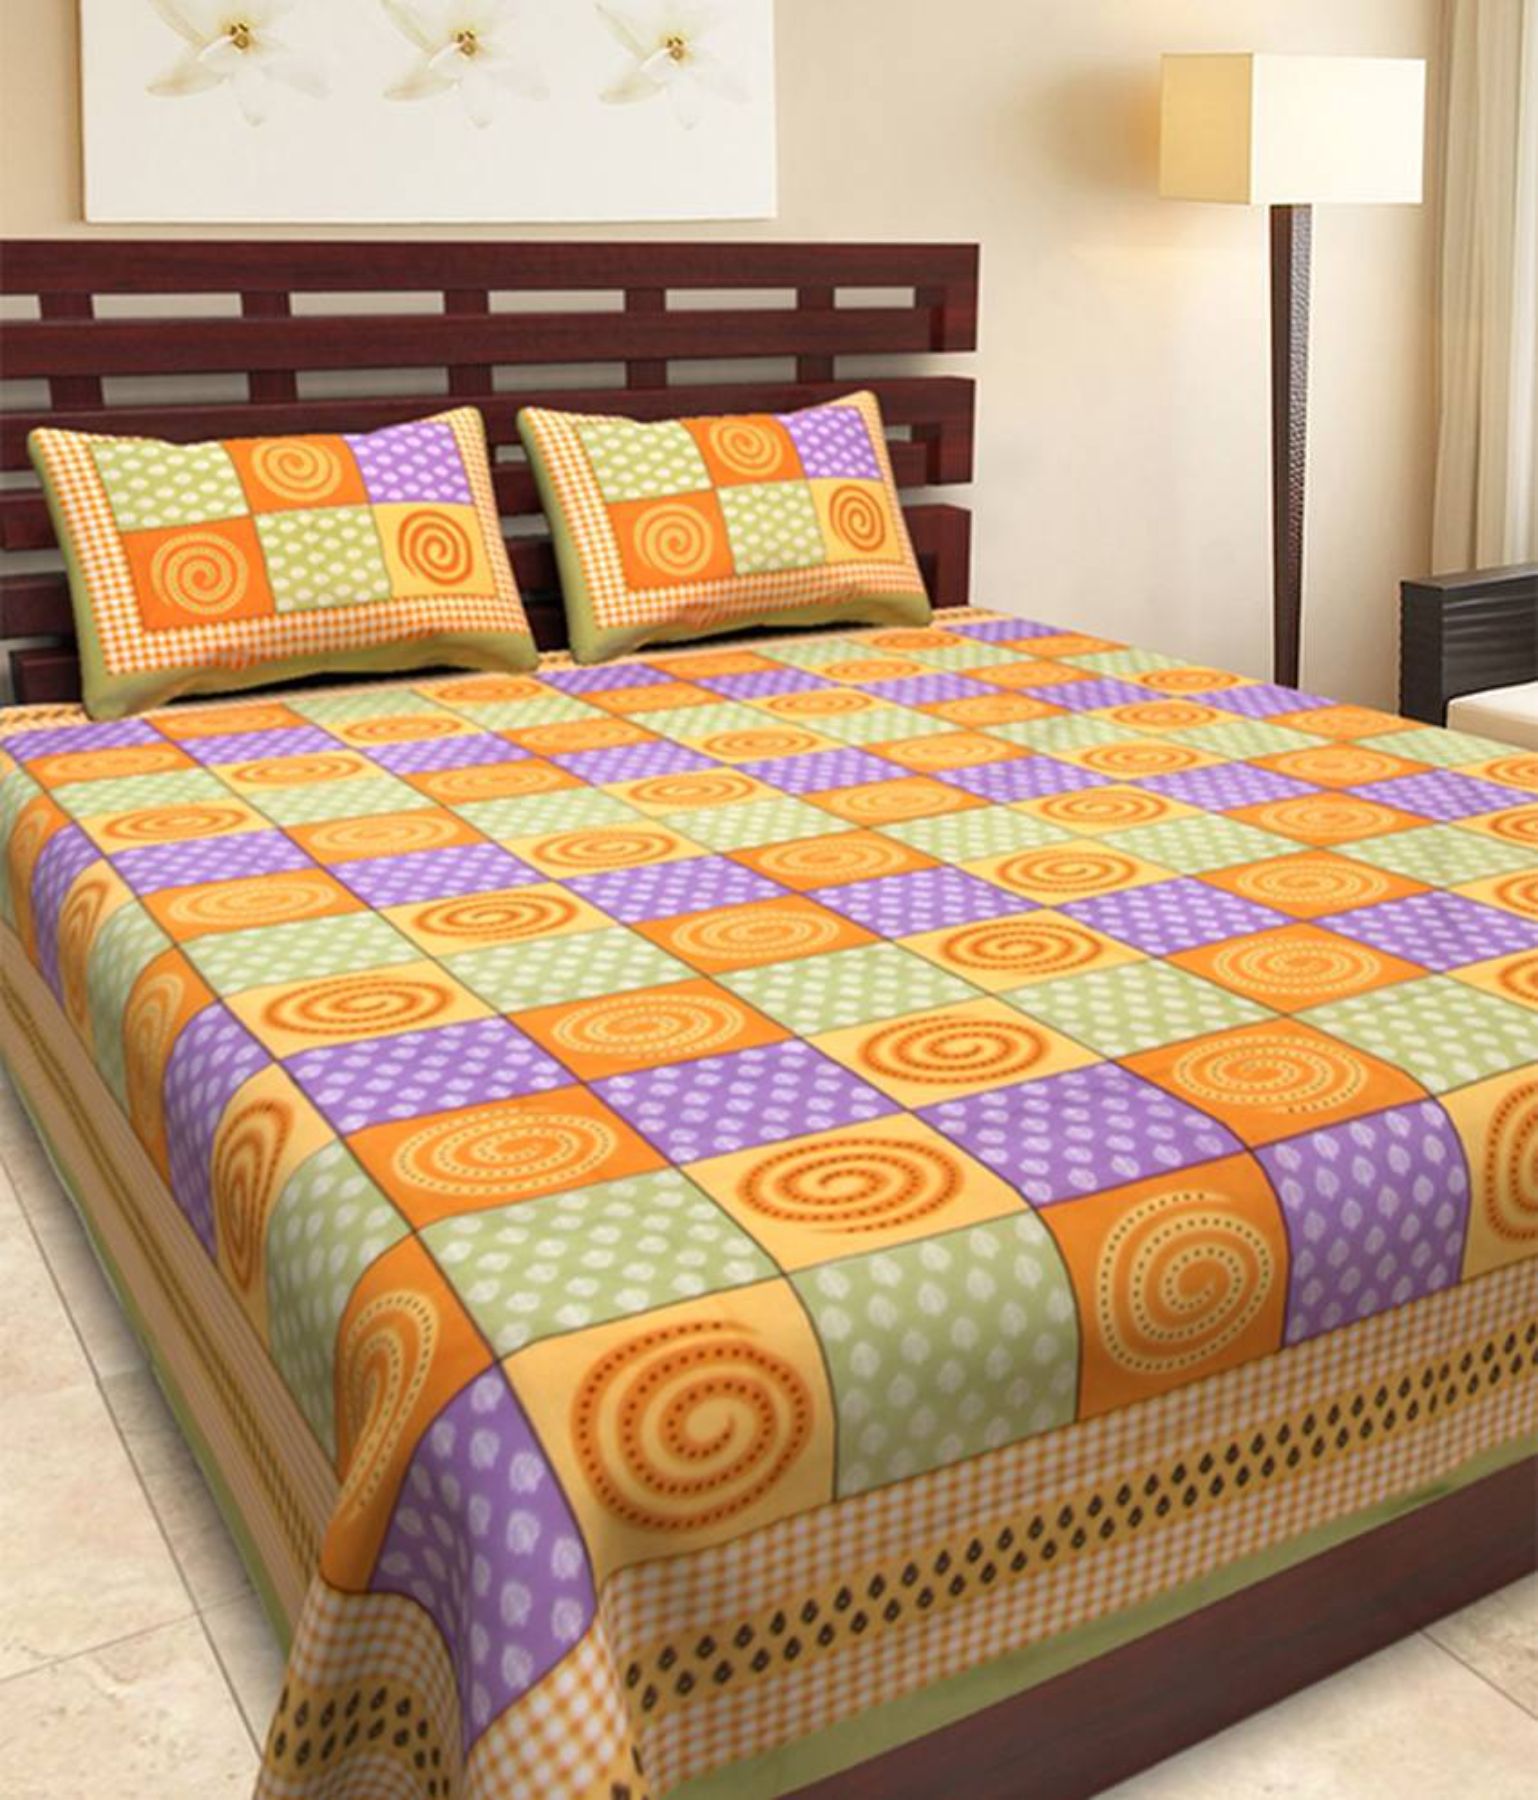     			UniqChoice 100% Cotton Traditional Jaipuri King Size Double Bed Sheet With 2 Pillow Cover